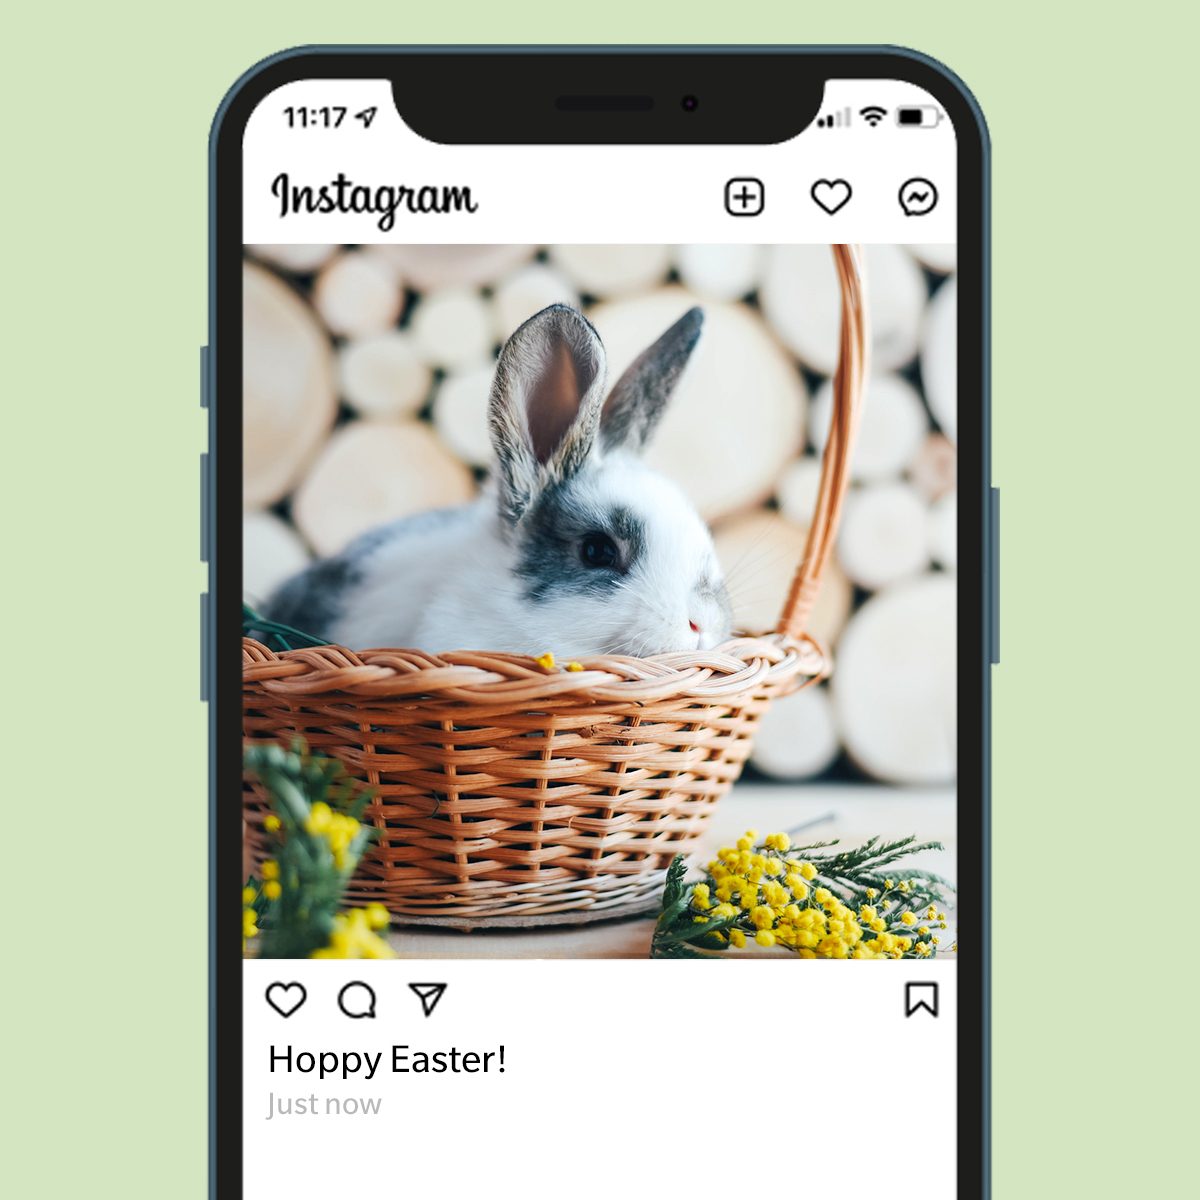 60 Best Easter Captions 2022: Funny, Cute, Inspiring Instagram Captions